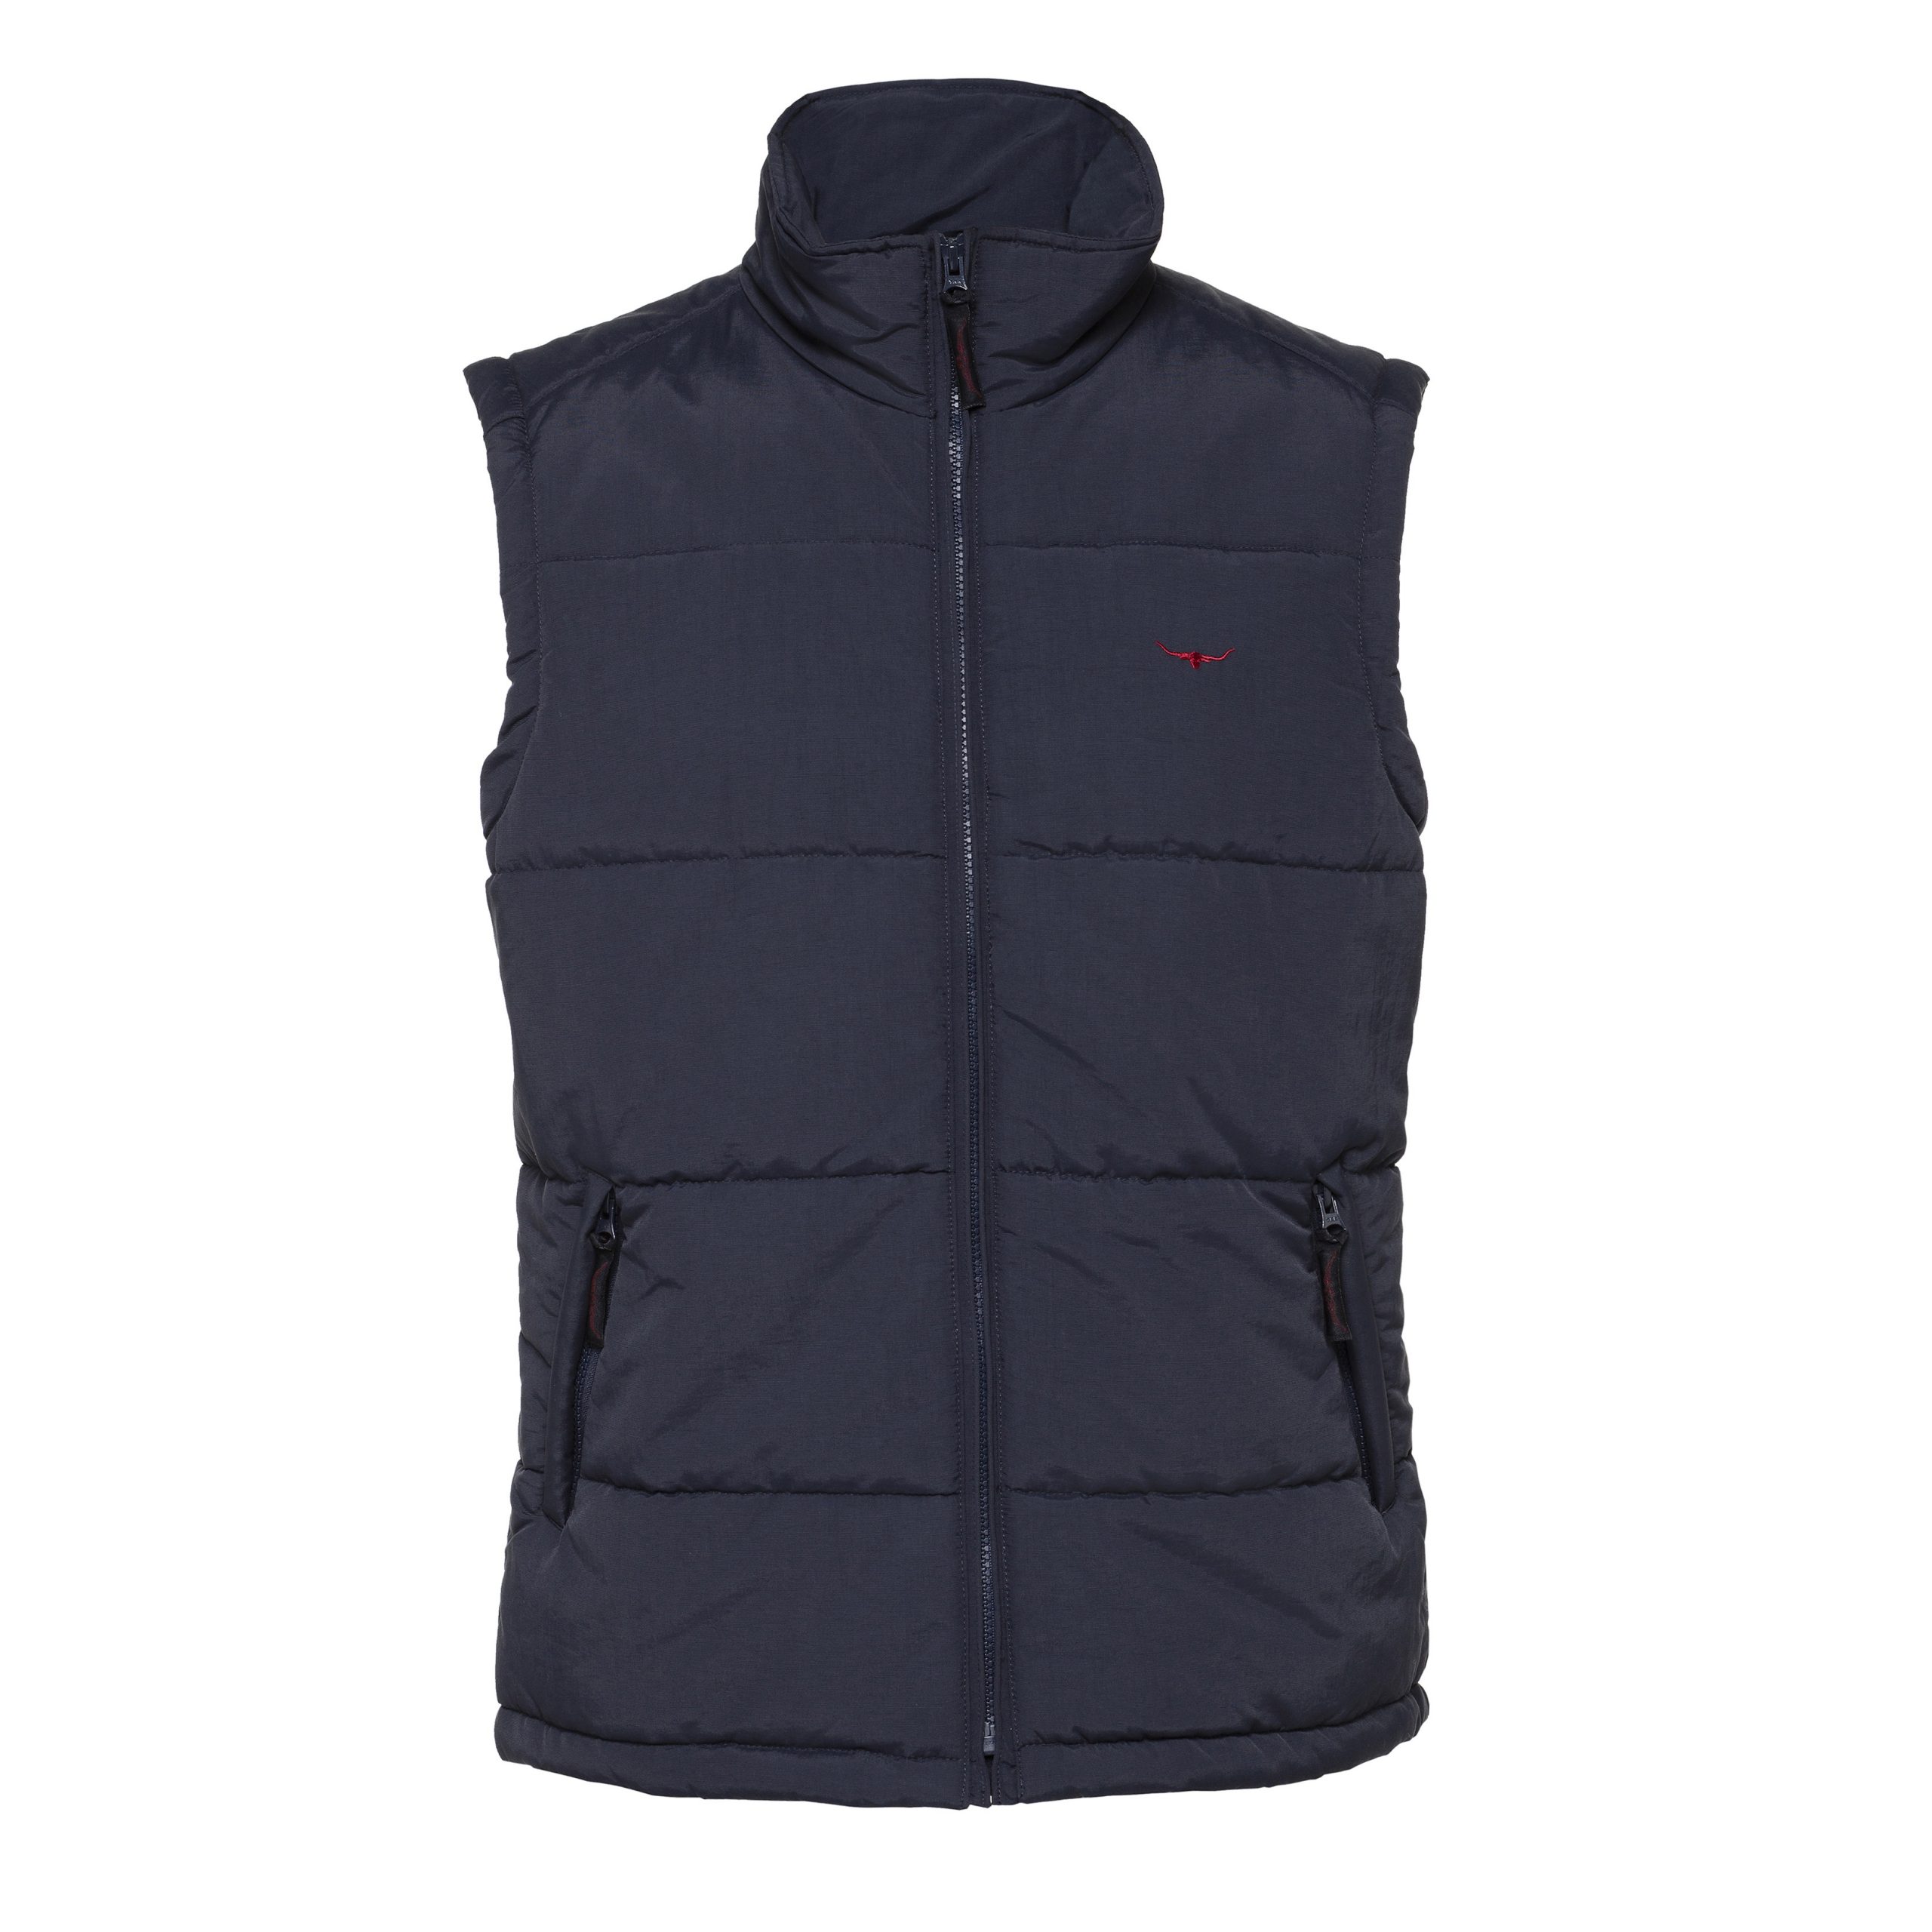 R.M Williams Patterson Creek Vest - Navy - Ruffords Country Store